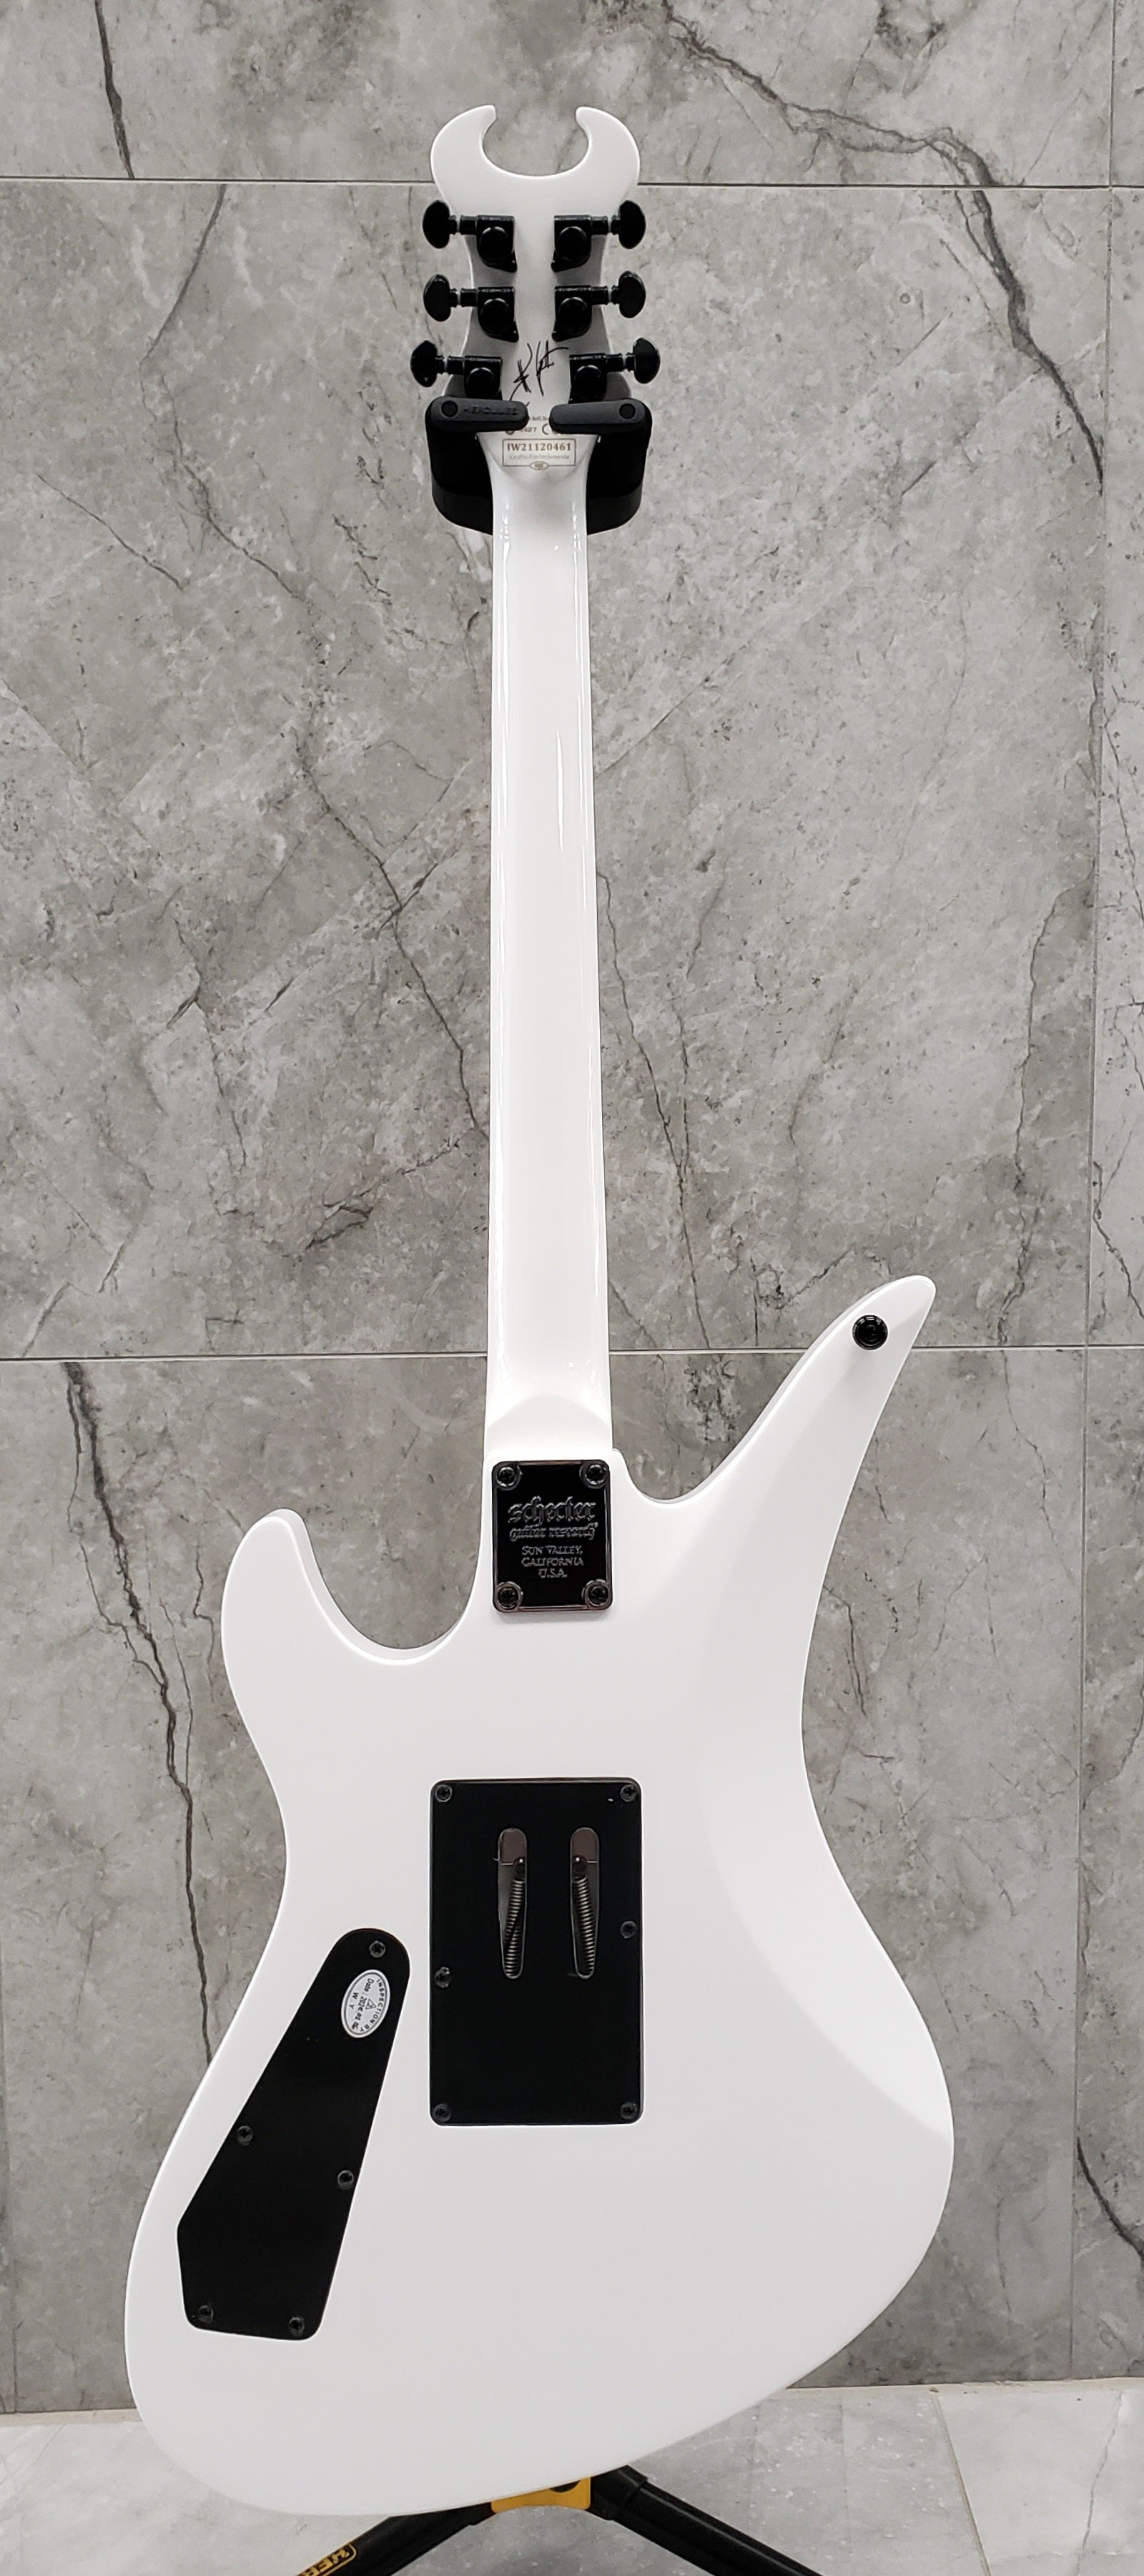 Schecter Synyster Standard Electric Guitar Gloss White with Black Pinstripes 1746-SHC SERIAL NUMBER IW21120461 - 7.8 LBS